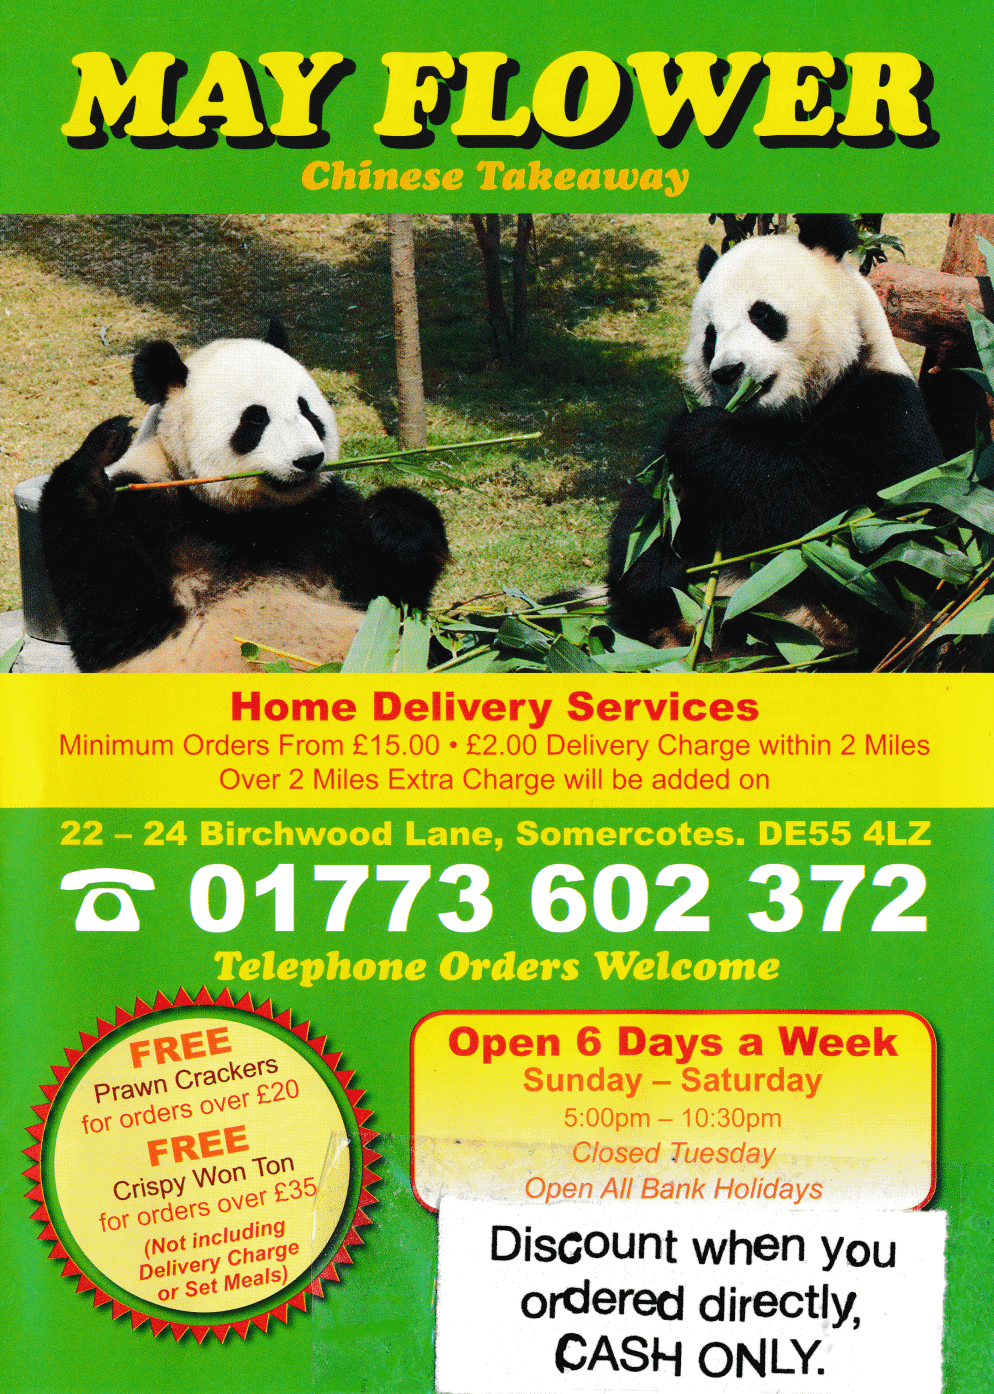 Menu for May Flower Chines and Thai food takeaway on Birchwood Lane in Somercotes, Derbyshire DE55 4LZ